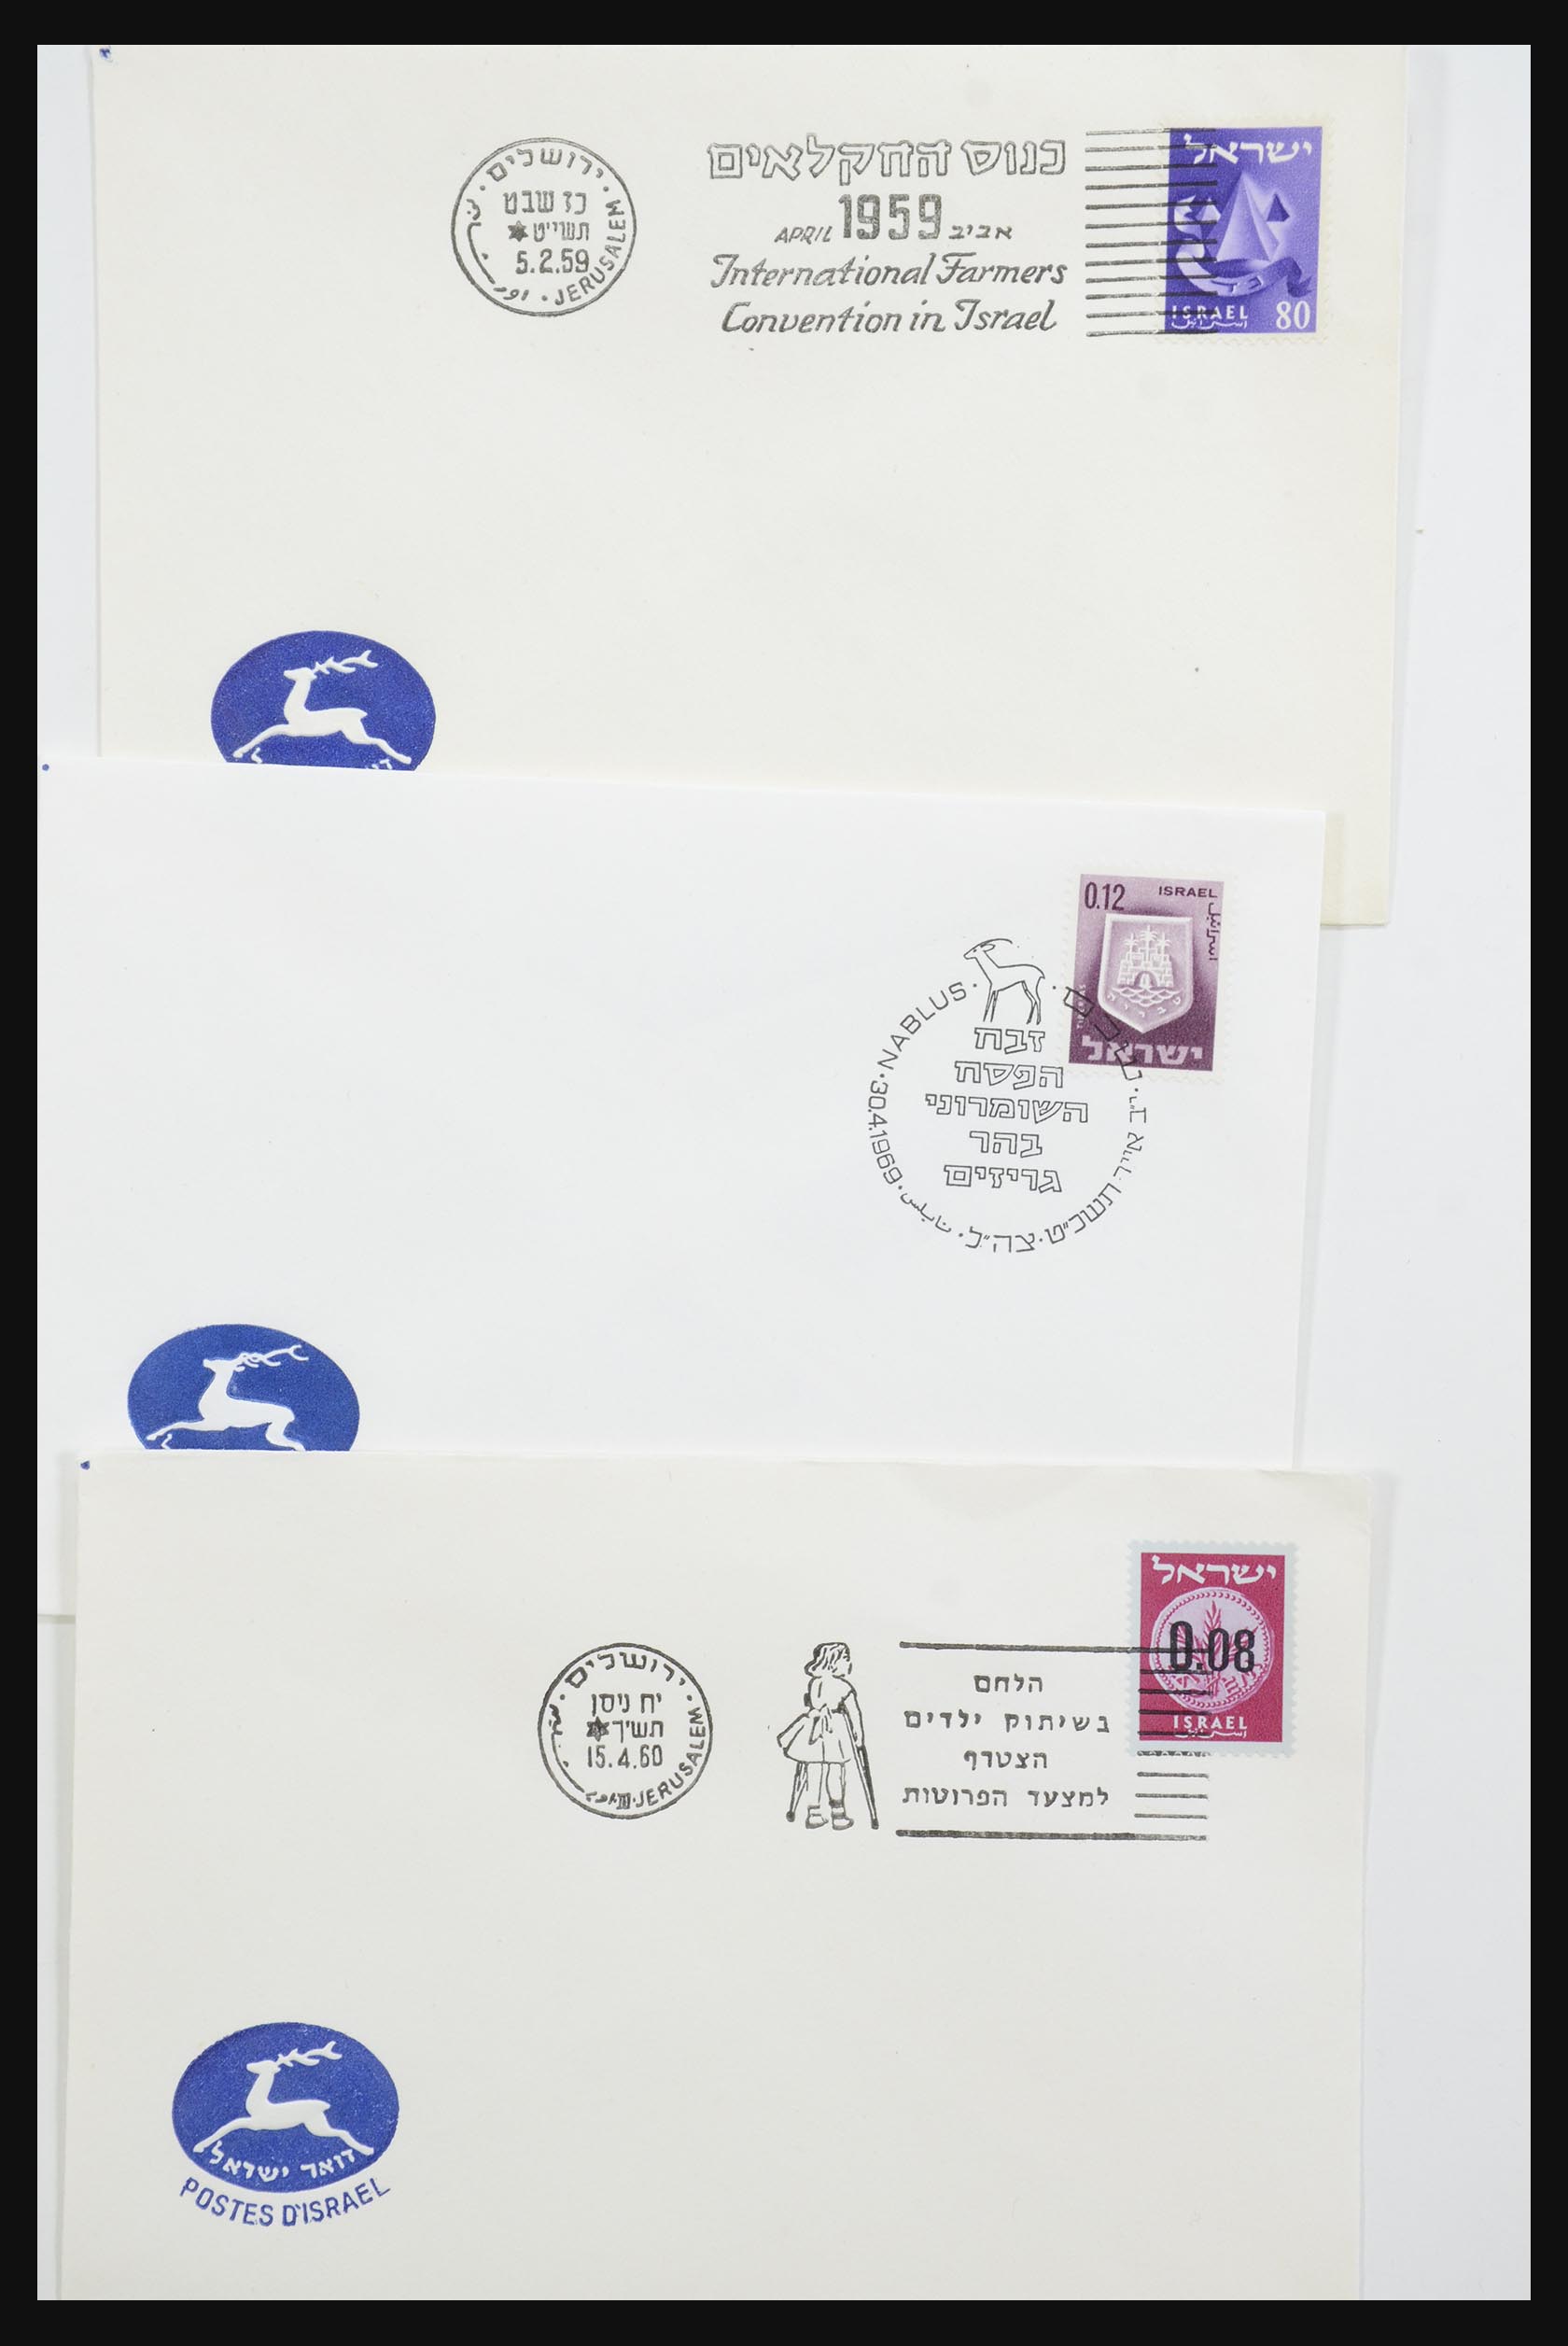 31924 067 - 31924 Israel first day cover collection 1957-2003.